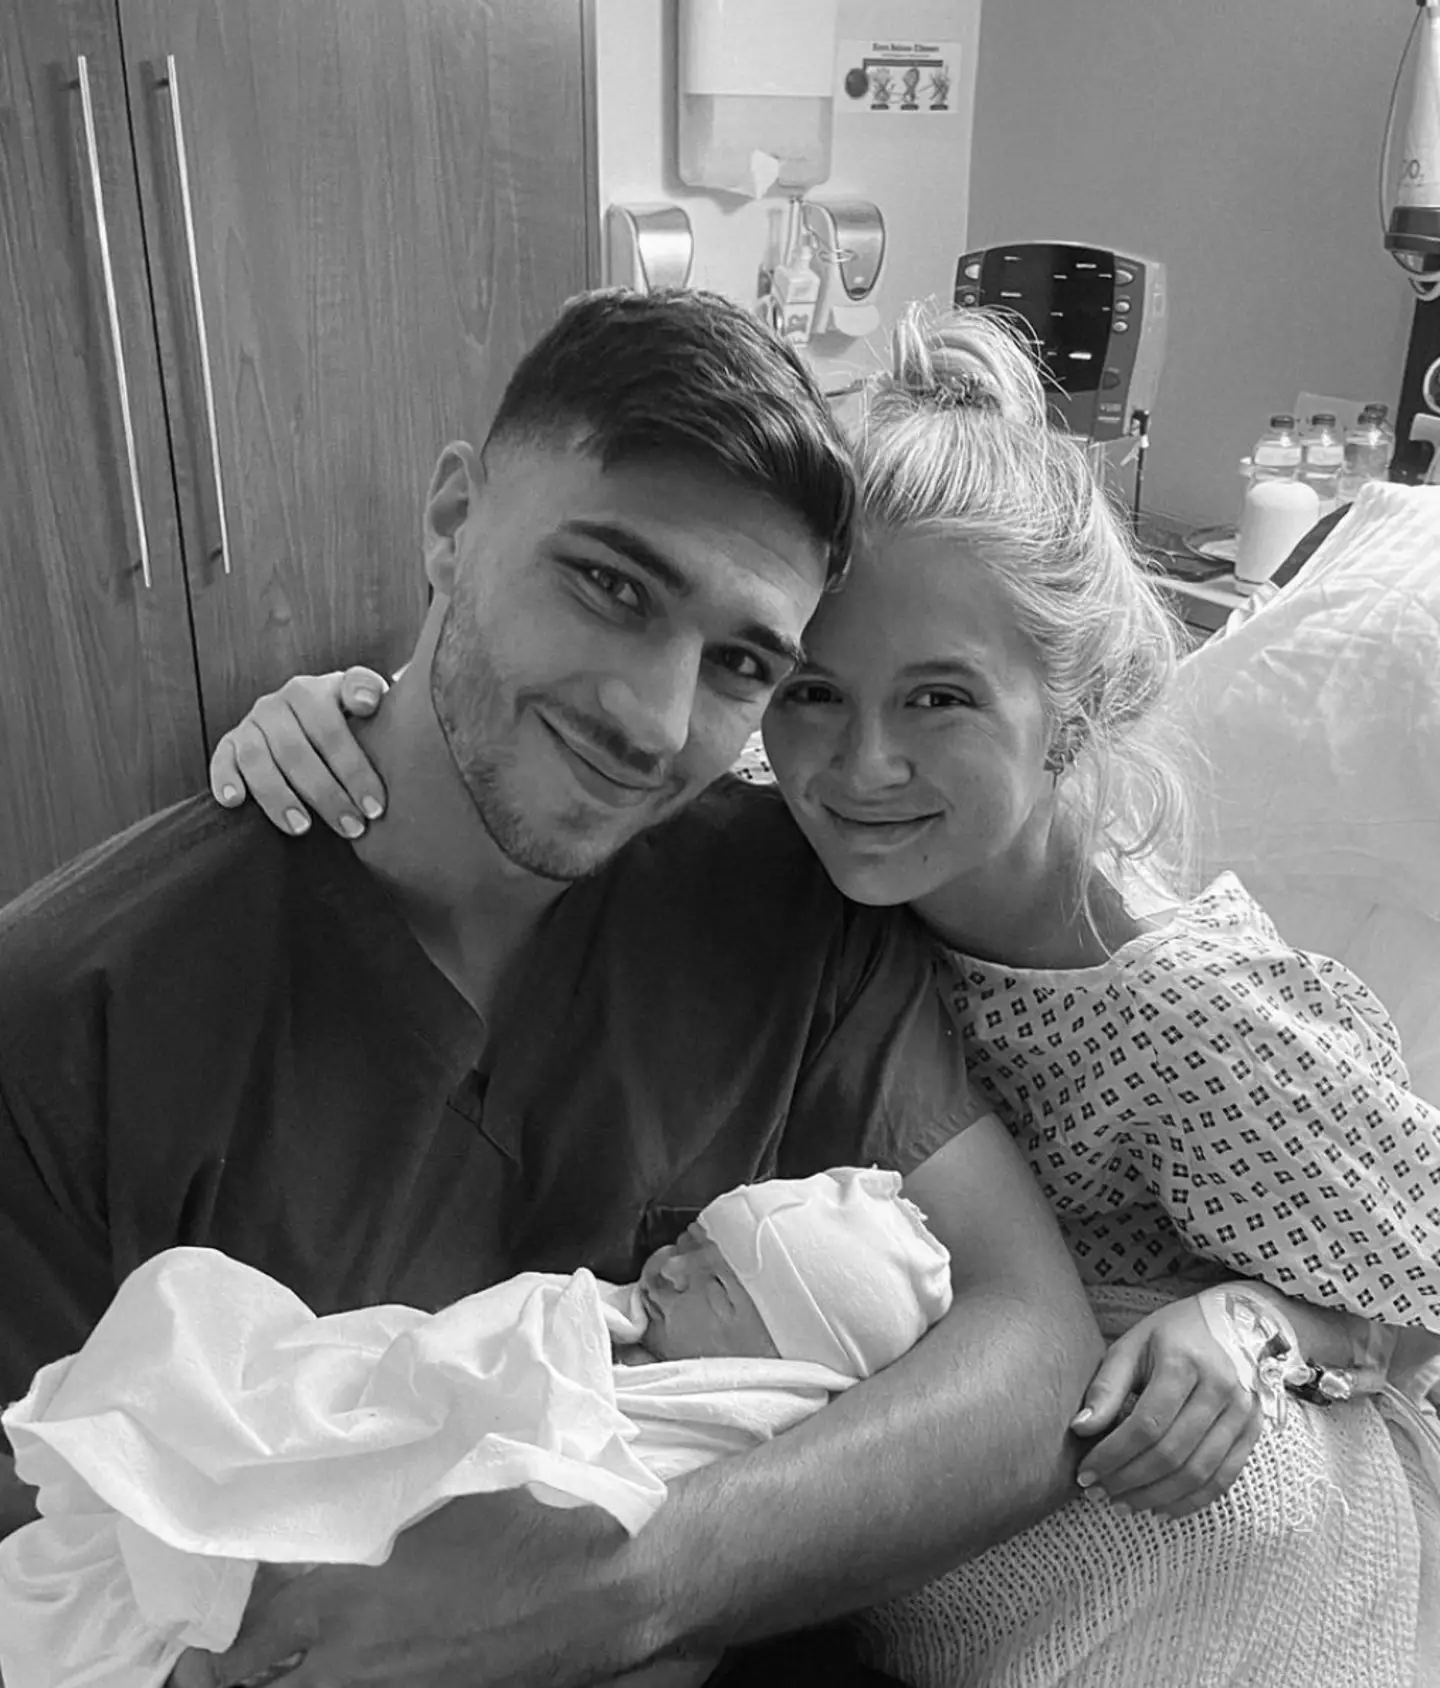 Tommy Fury has welcomed his first child with Molly Mae Hague.